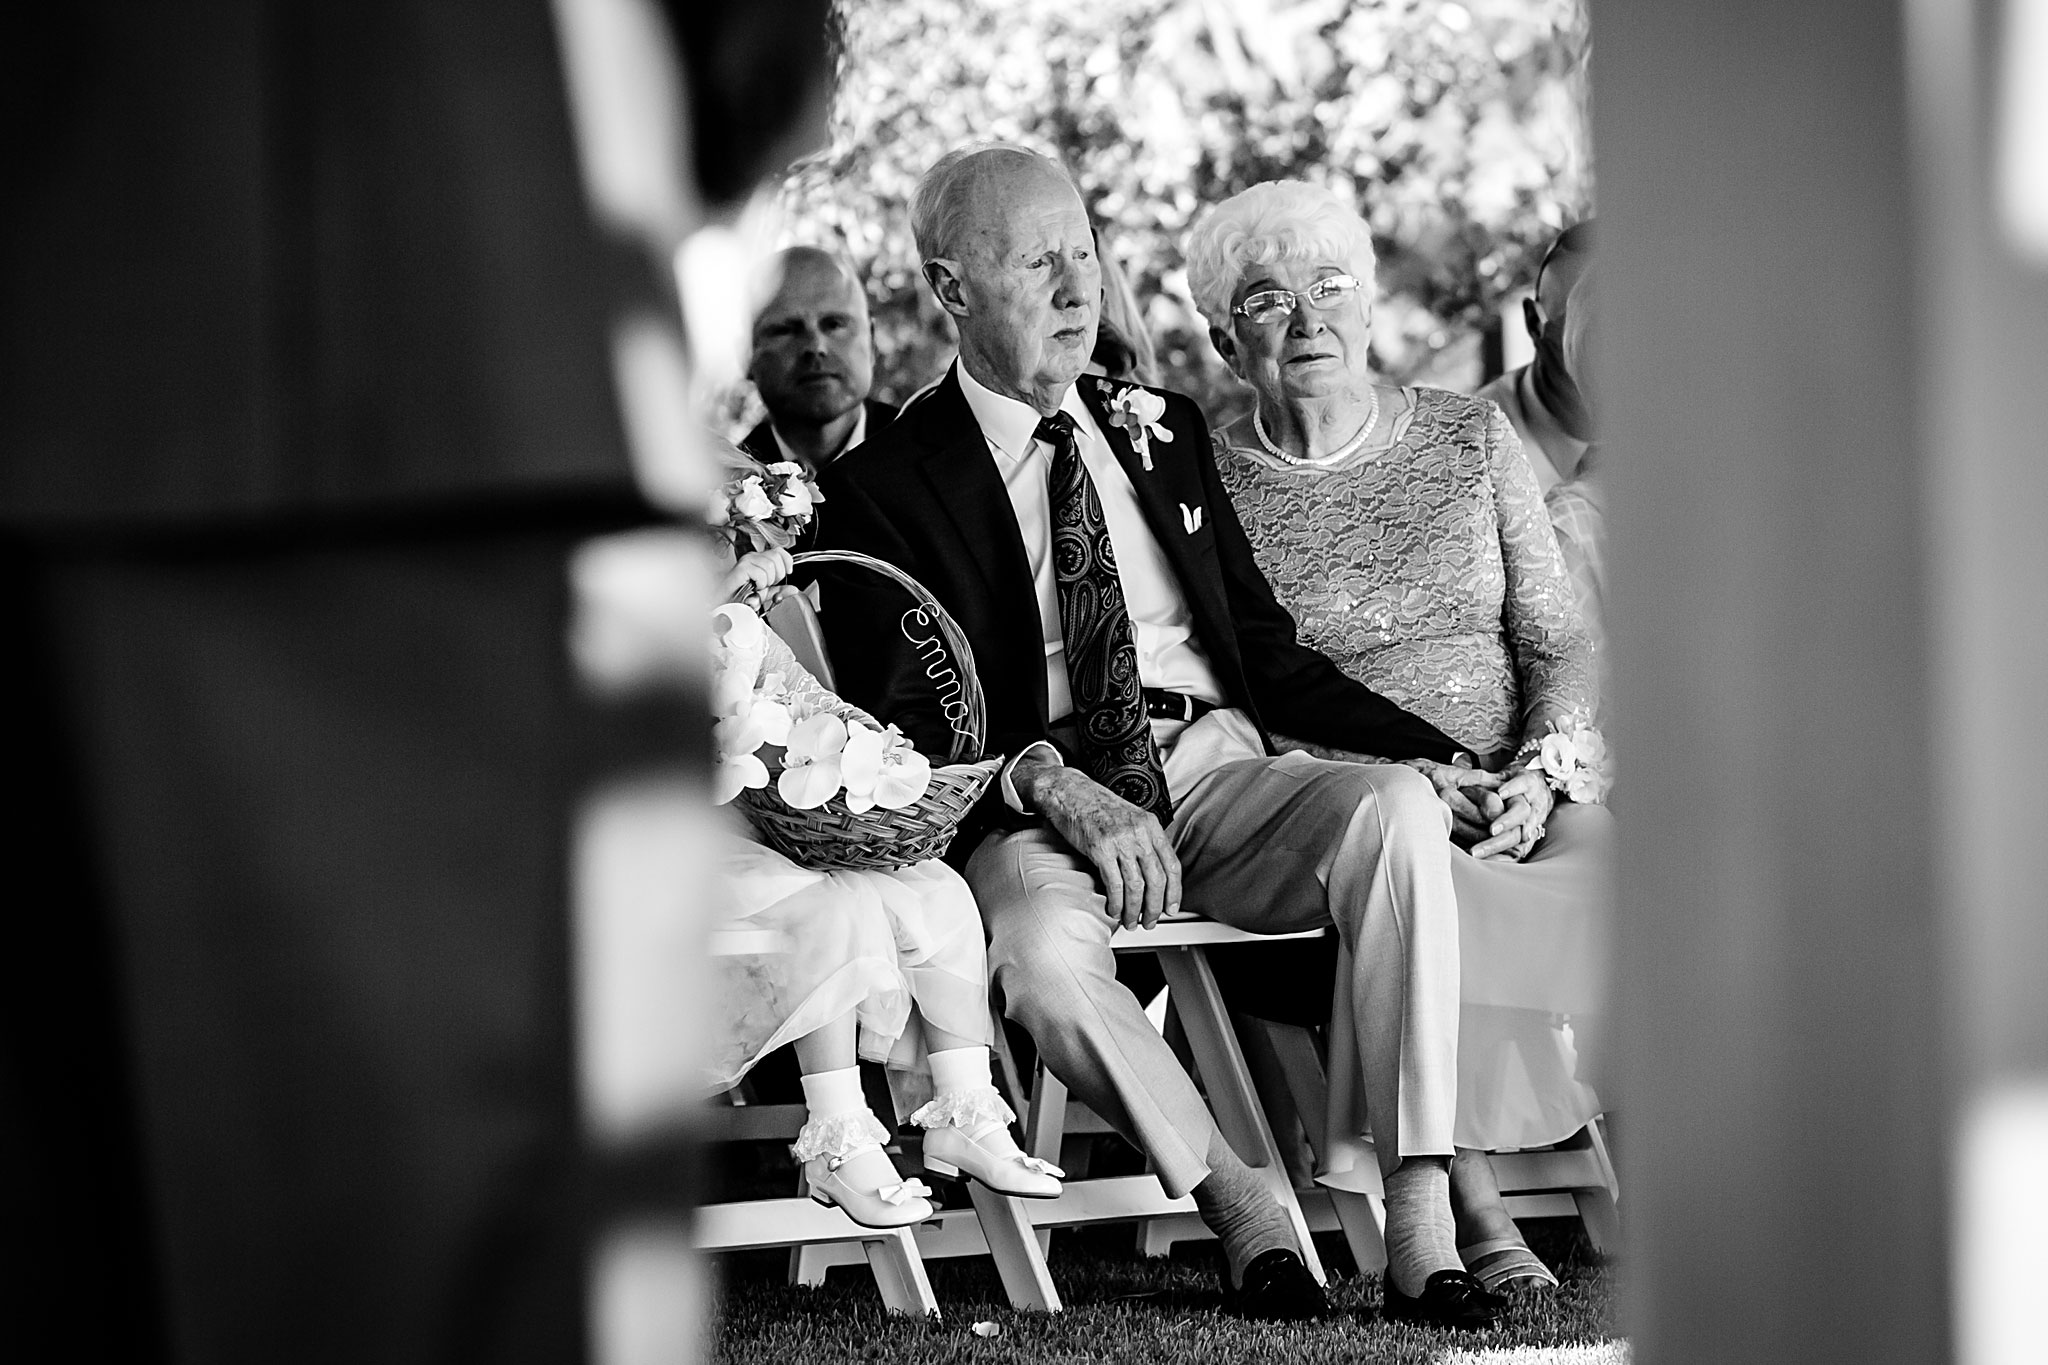 Bride's grandparents watching the ceremony. Kelli & Jason's golf course wedding at The Ranch Country Club by Colorado Wedding Photographer Jennifer Garza, Small wedding ideas, Intimate wedding, Golf Course Wedding, Country Club Wedding, Summer Wedding, Golf Wedding, Wedding planning, Colorado Wedding Photographer, Colorado Elopement Photographer, Colorado Elopement, Colorado Wedding, Denver Wedding Photographer, Denver Wedding, Wedding Inspiration, Summer Wedding Inspiration, Covid Wedding